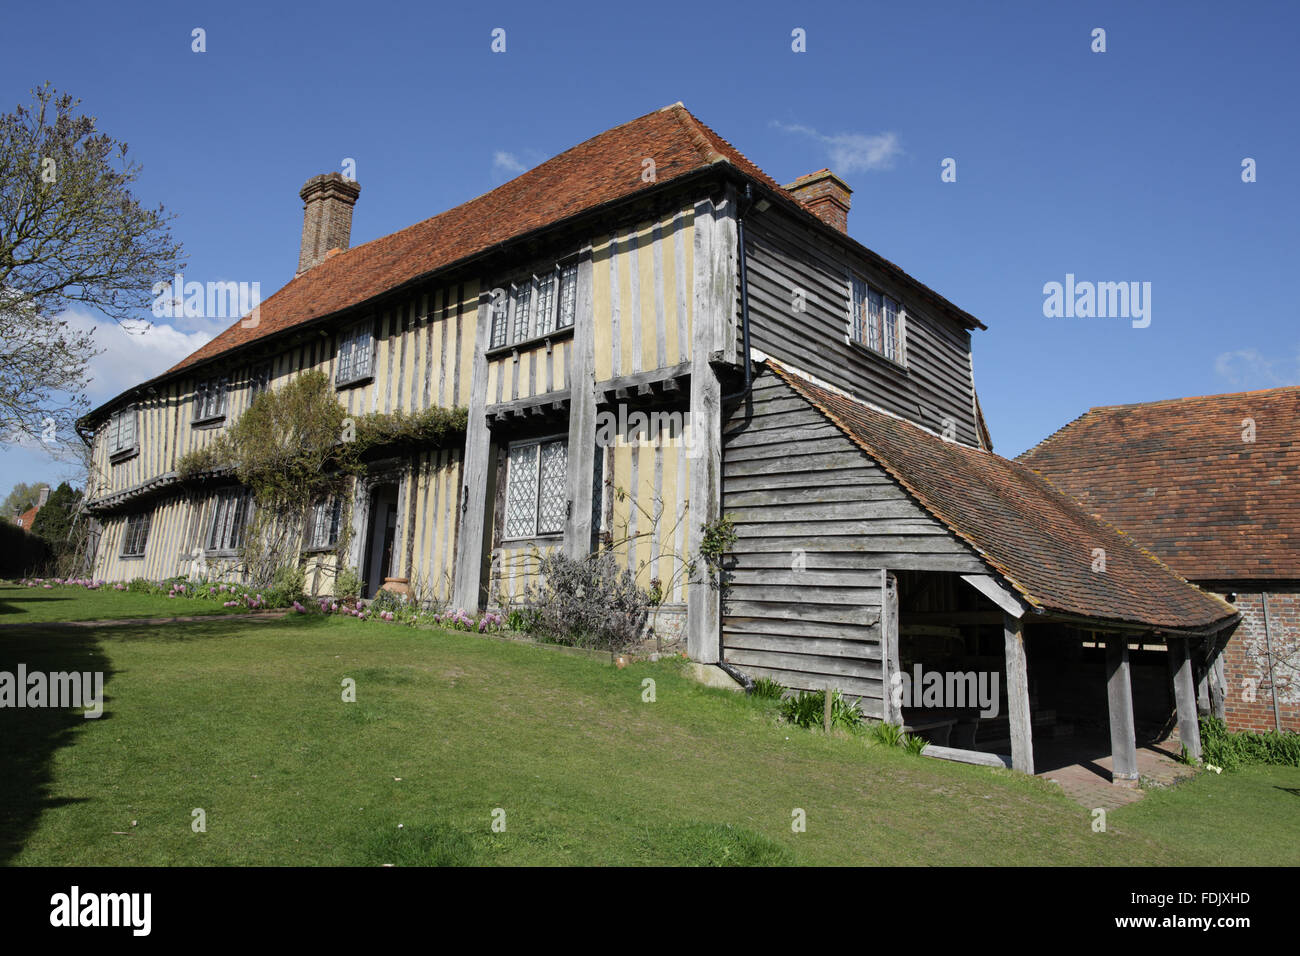 Exterior view of Smallhythe Place, the home of actor Ellen Terry from 1899  to 1928, in Kent. The house is an early 16th century half-timbered  farmhouse which was originally a yeoman's house